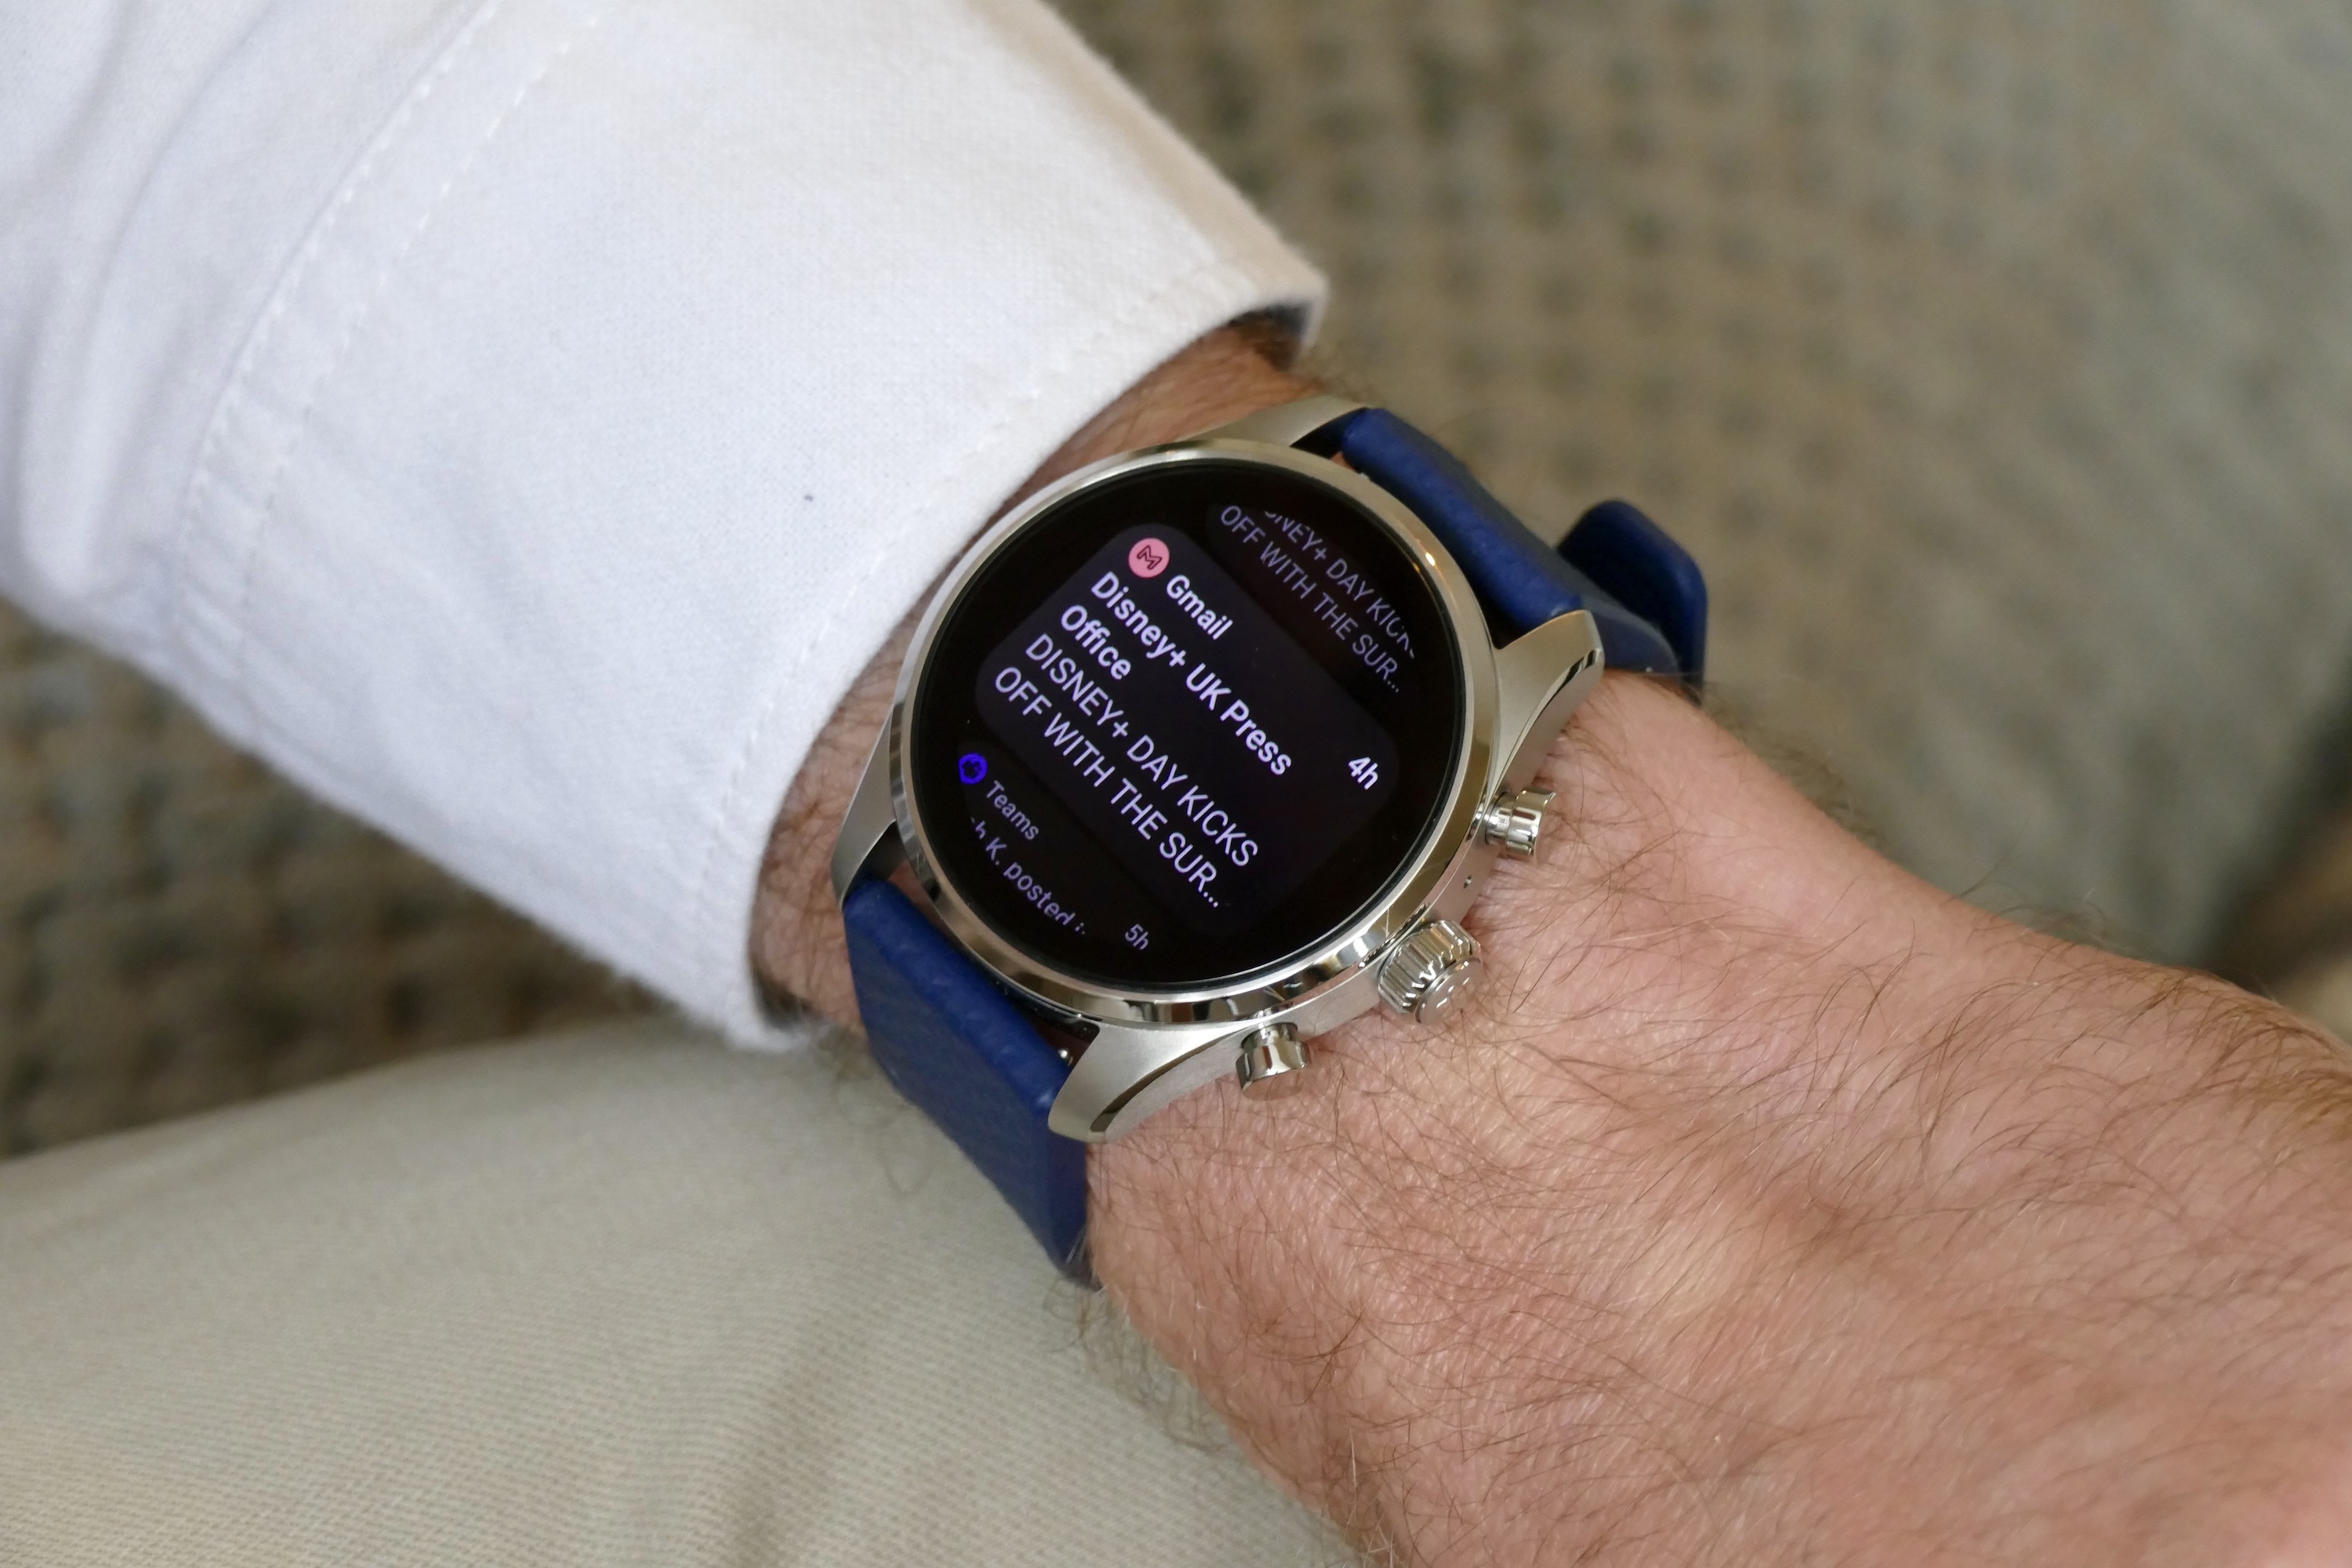 Notifications on the Montblanc Summit 3.